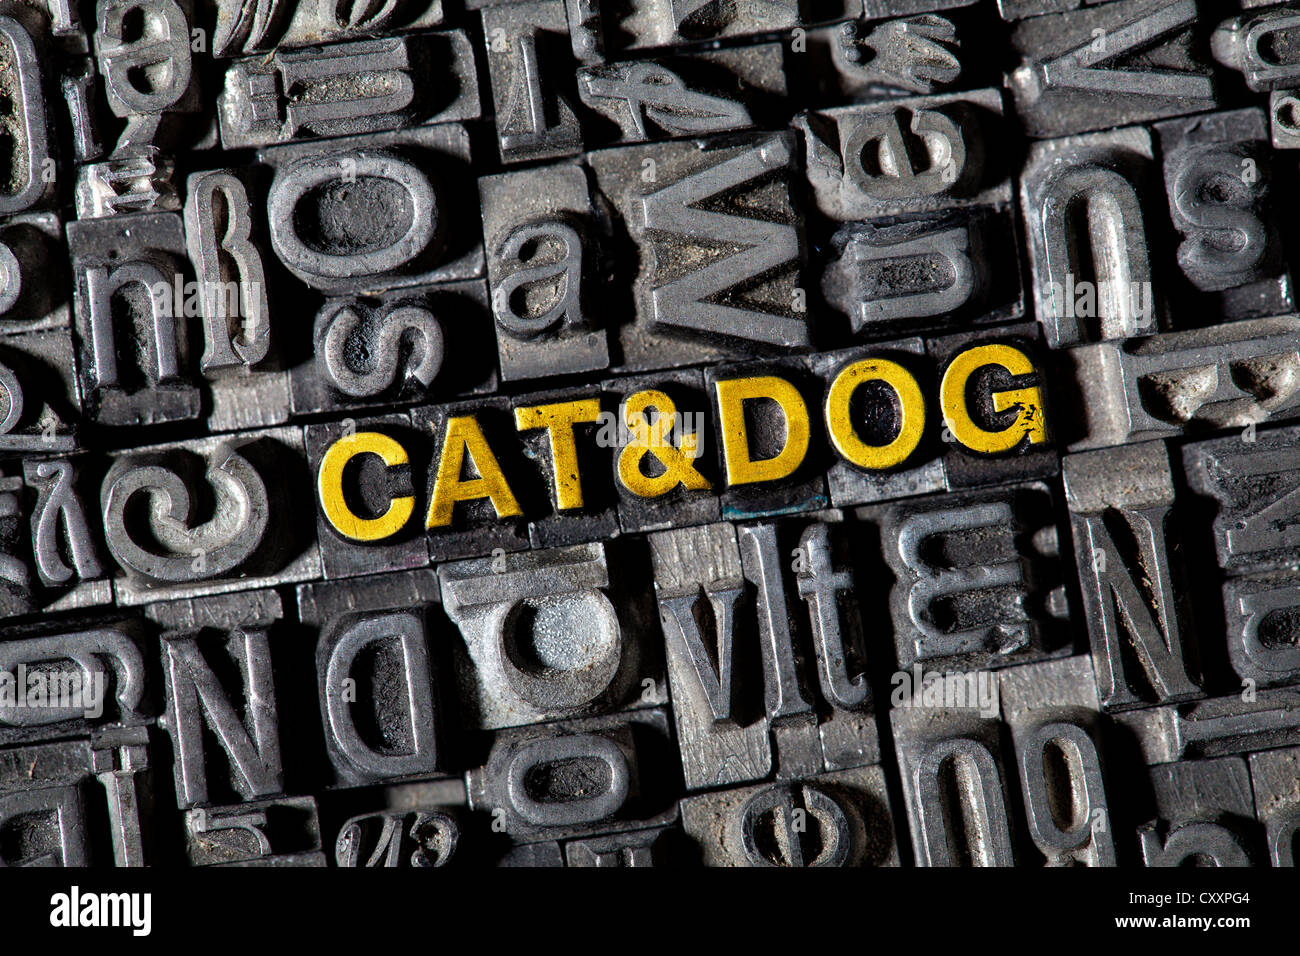 Old lead letters forming the words "CAT & DOG" Stock Photo